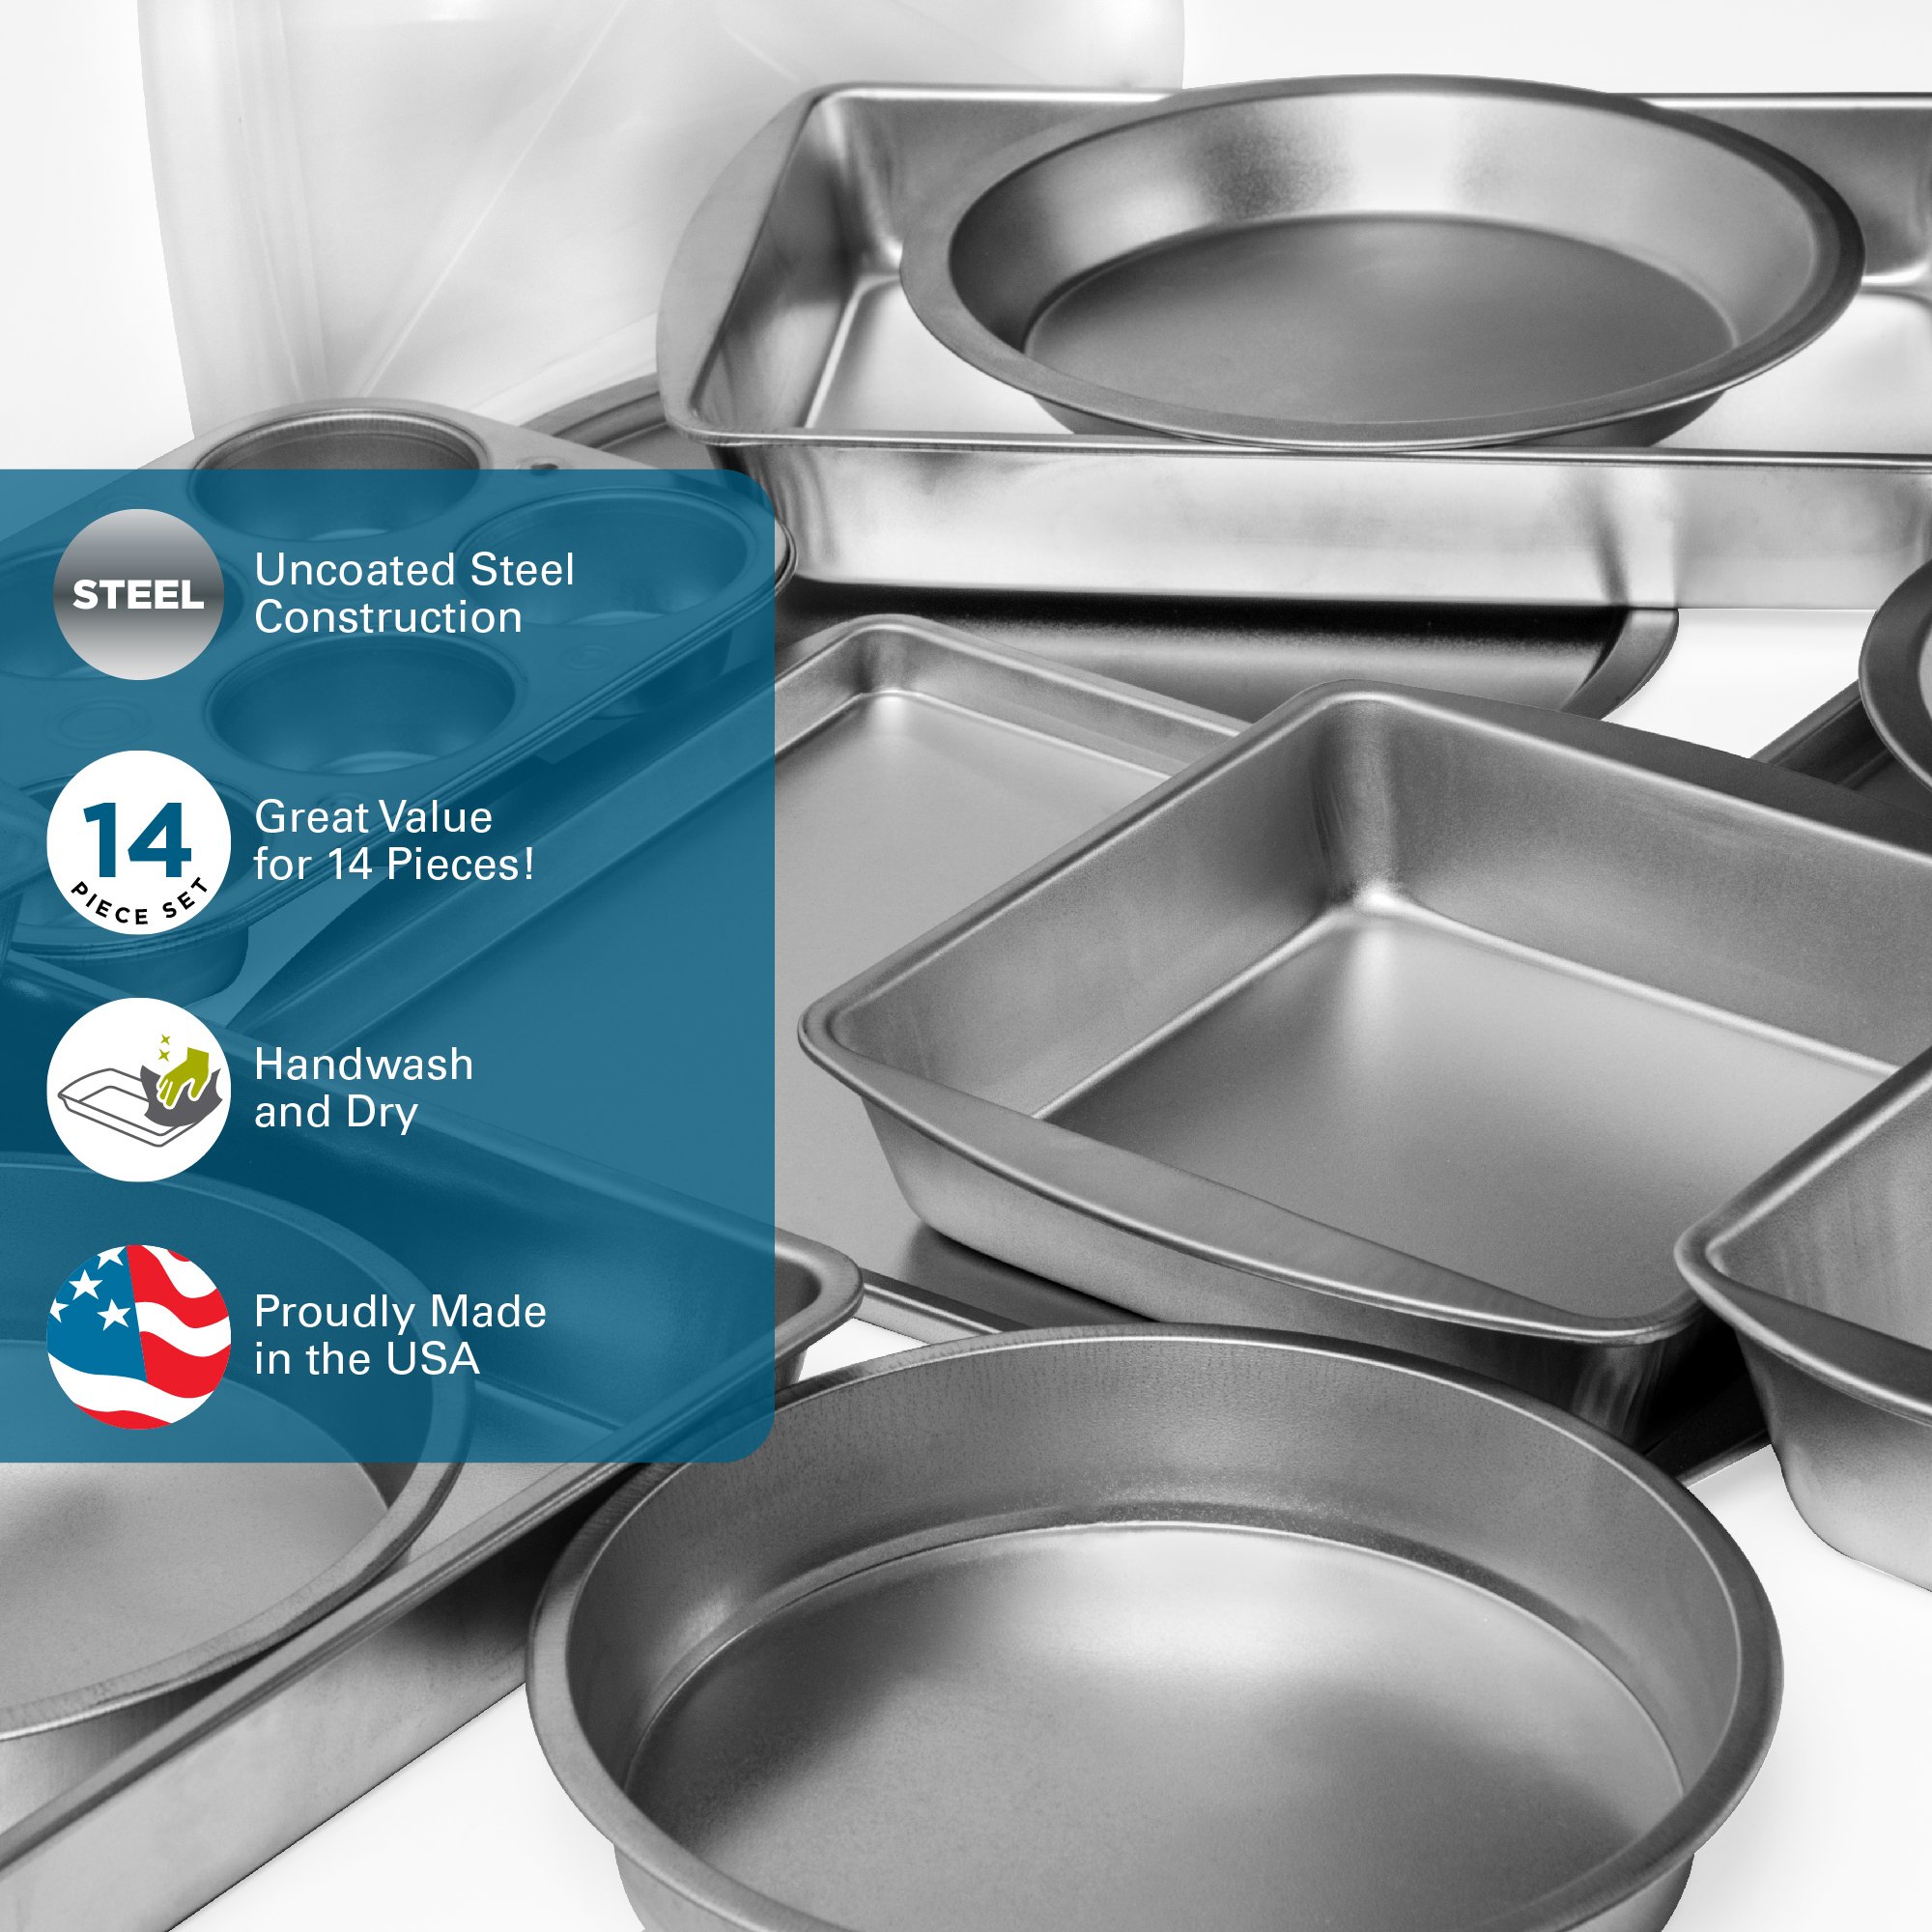 G & S Metal Products Company EZ Baker Uncoated, Durable Steel Construction 14-Piece Bakeware Set